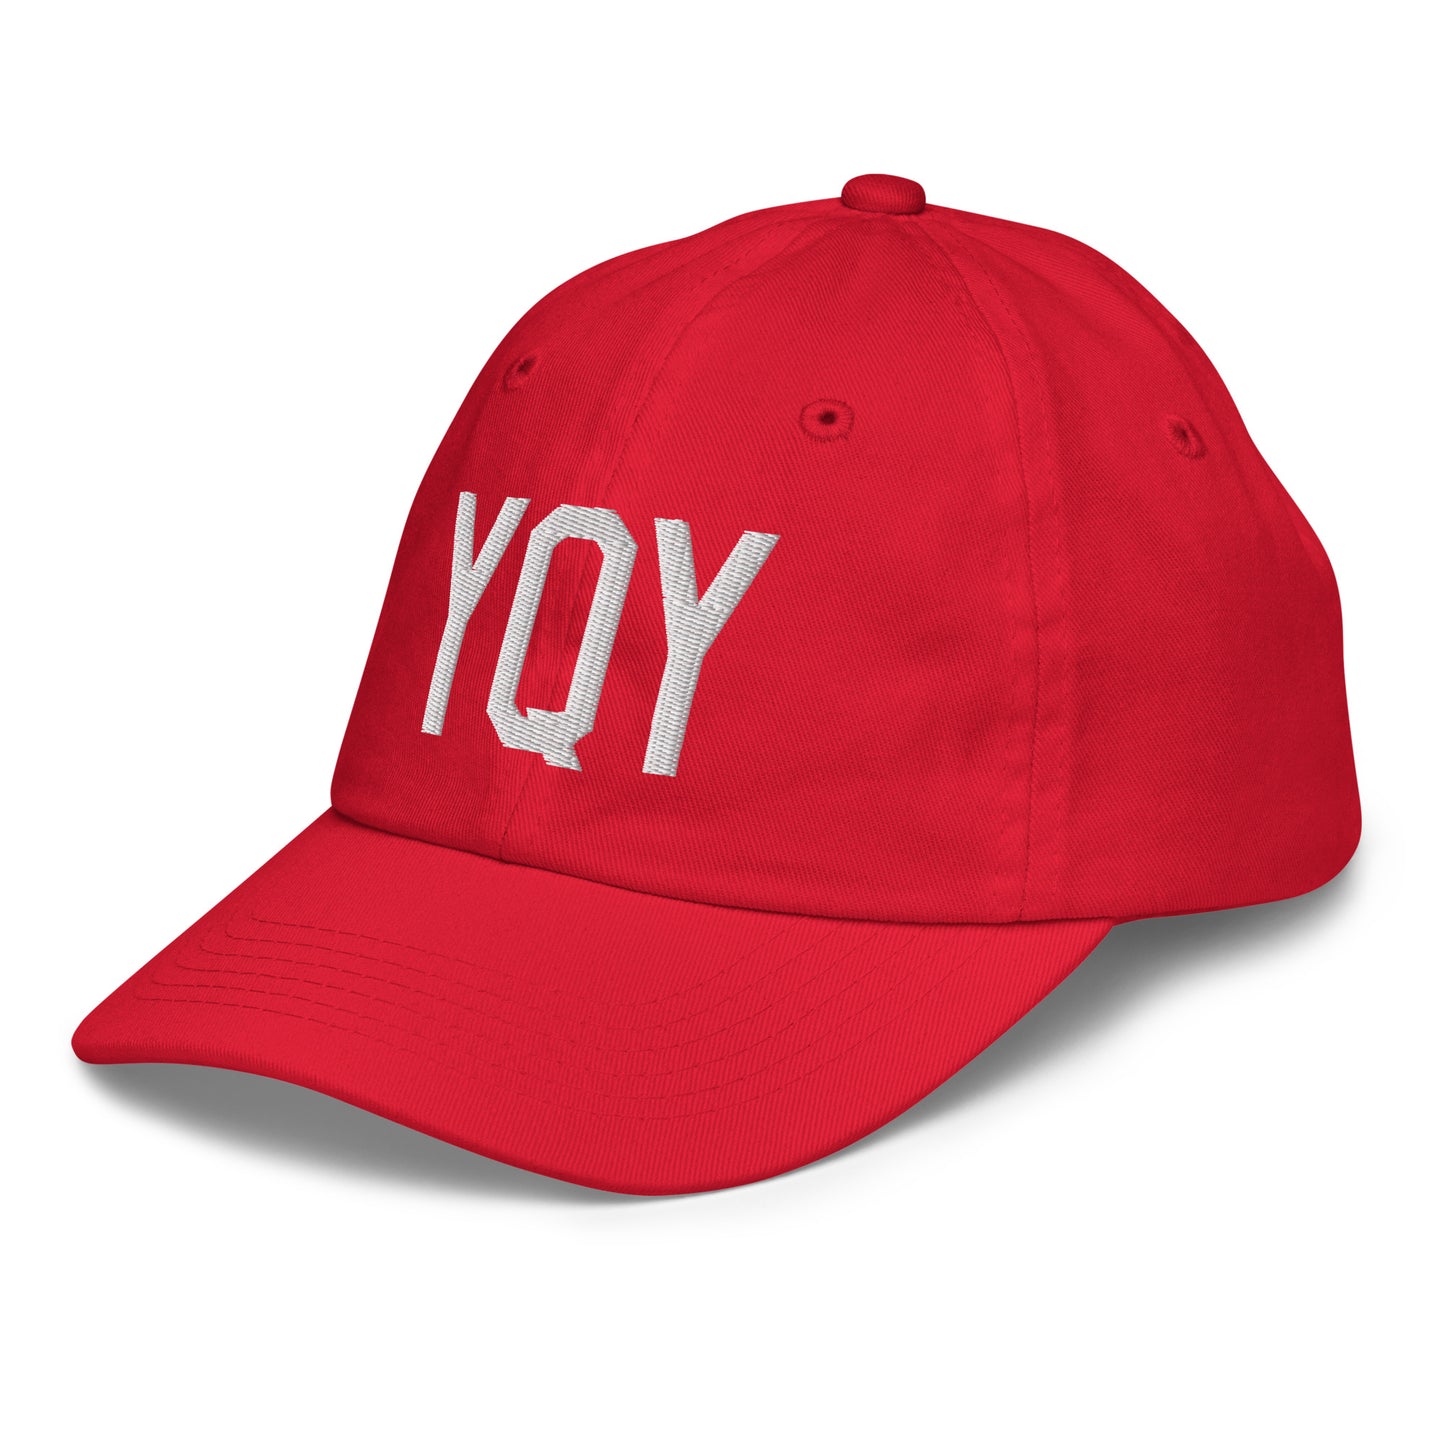 Airport Code Kid's Baseball Cap - White • YQY Sydney • YHM Designs - Image 19